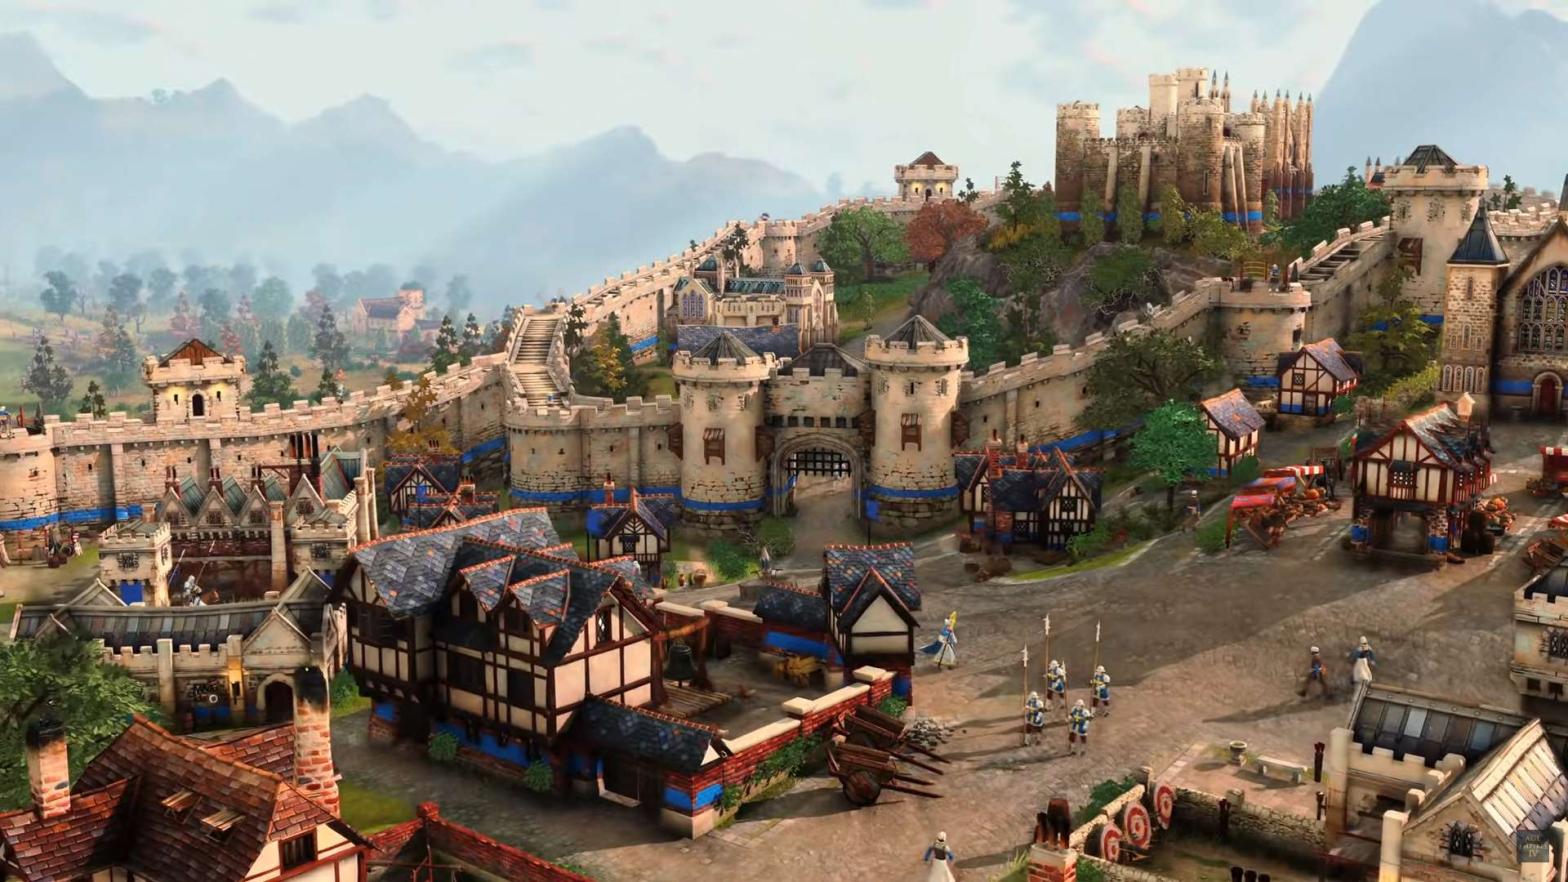 A fully built town in age of empires 4 with stone walls and stables